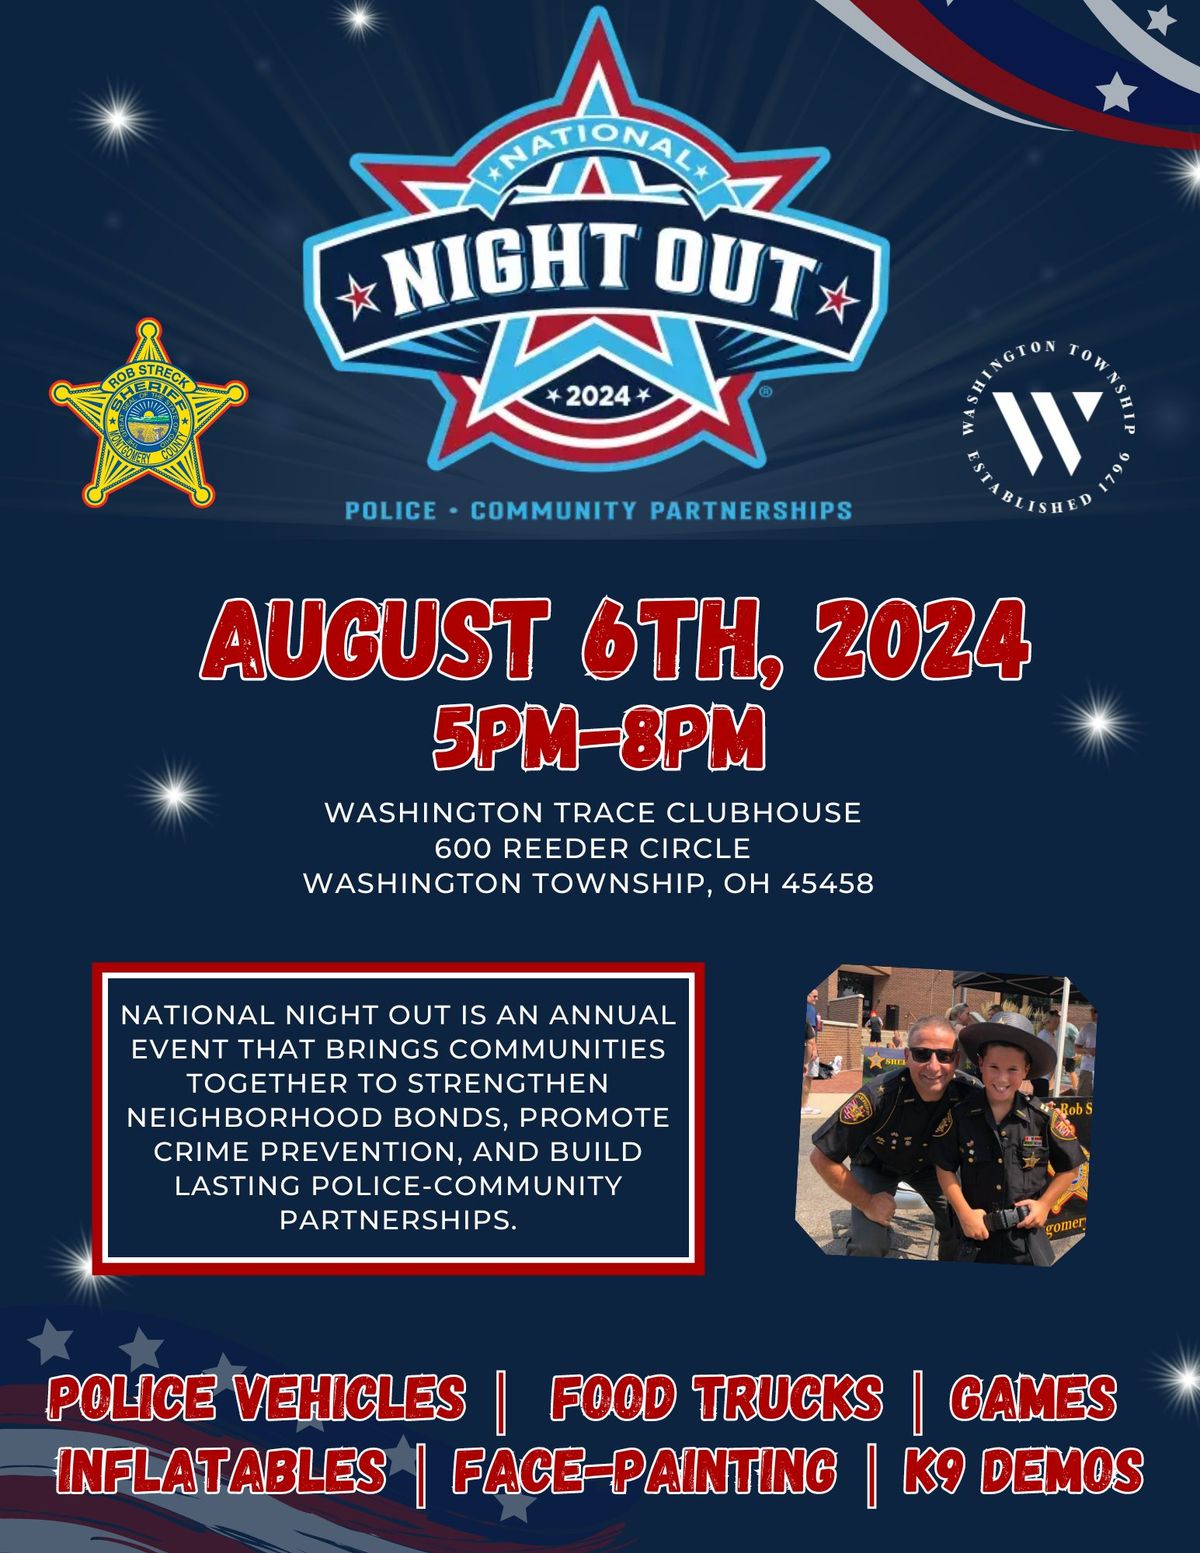 National Night Out in Washington Township!